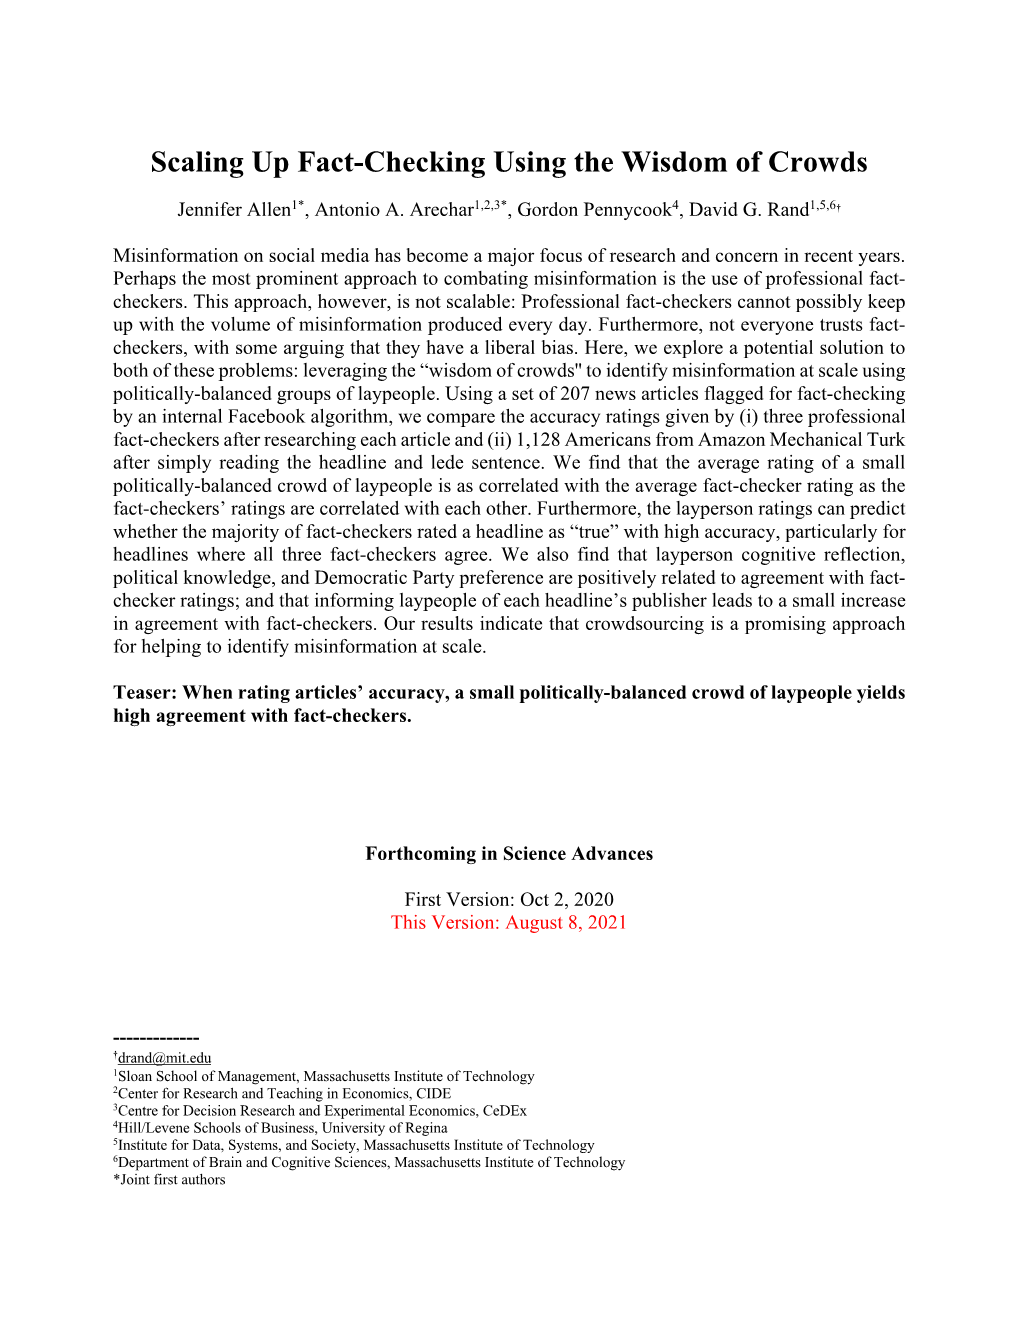 Scaling up Fact-Checking Using the Wisdom of Crowds